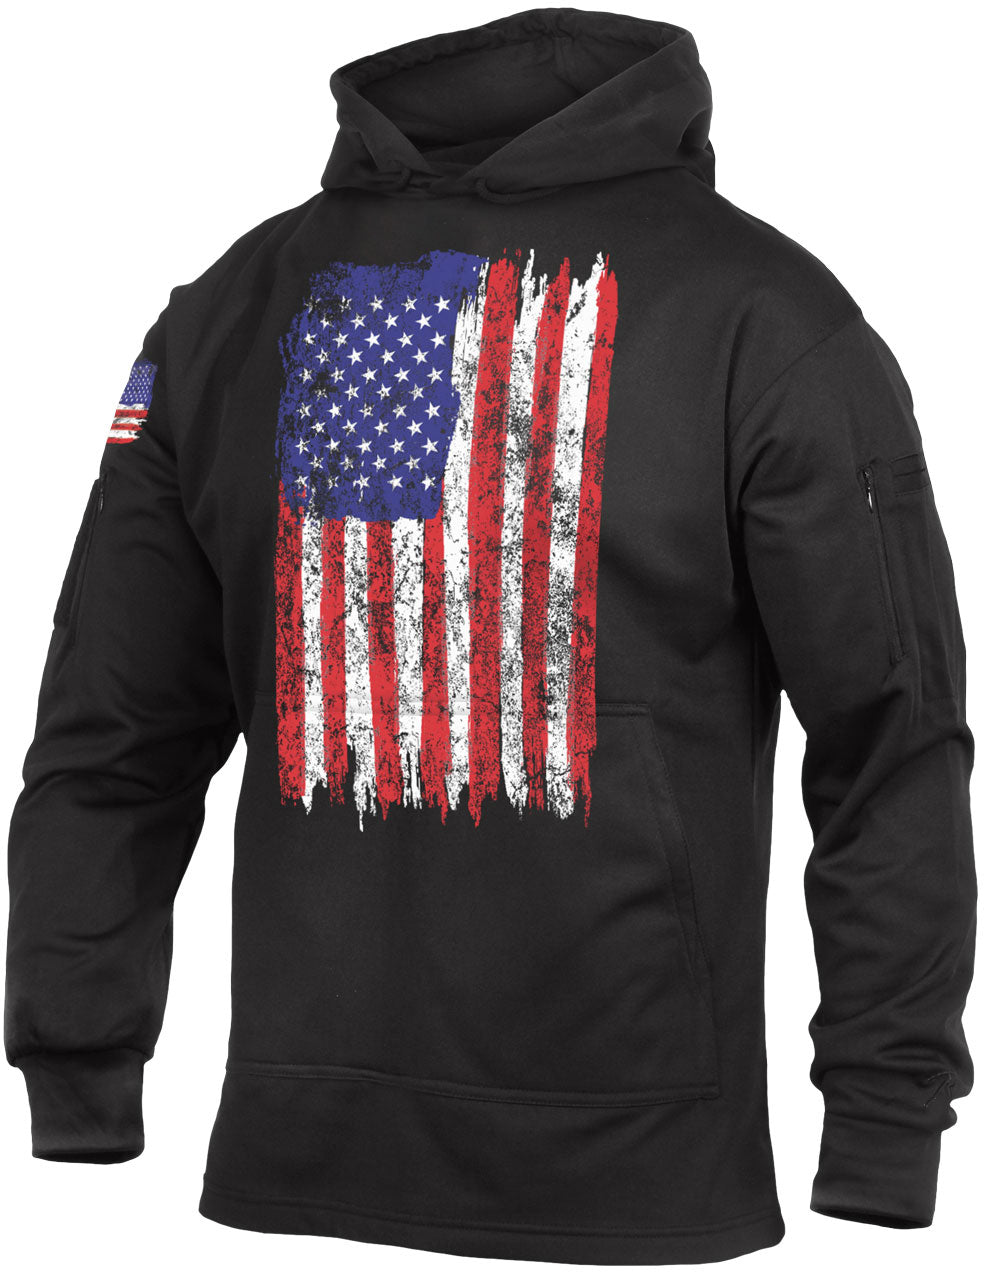 Red / White / Blue - U.S. Flag Concealed Carry Hoodie